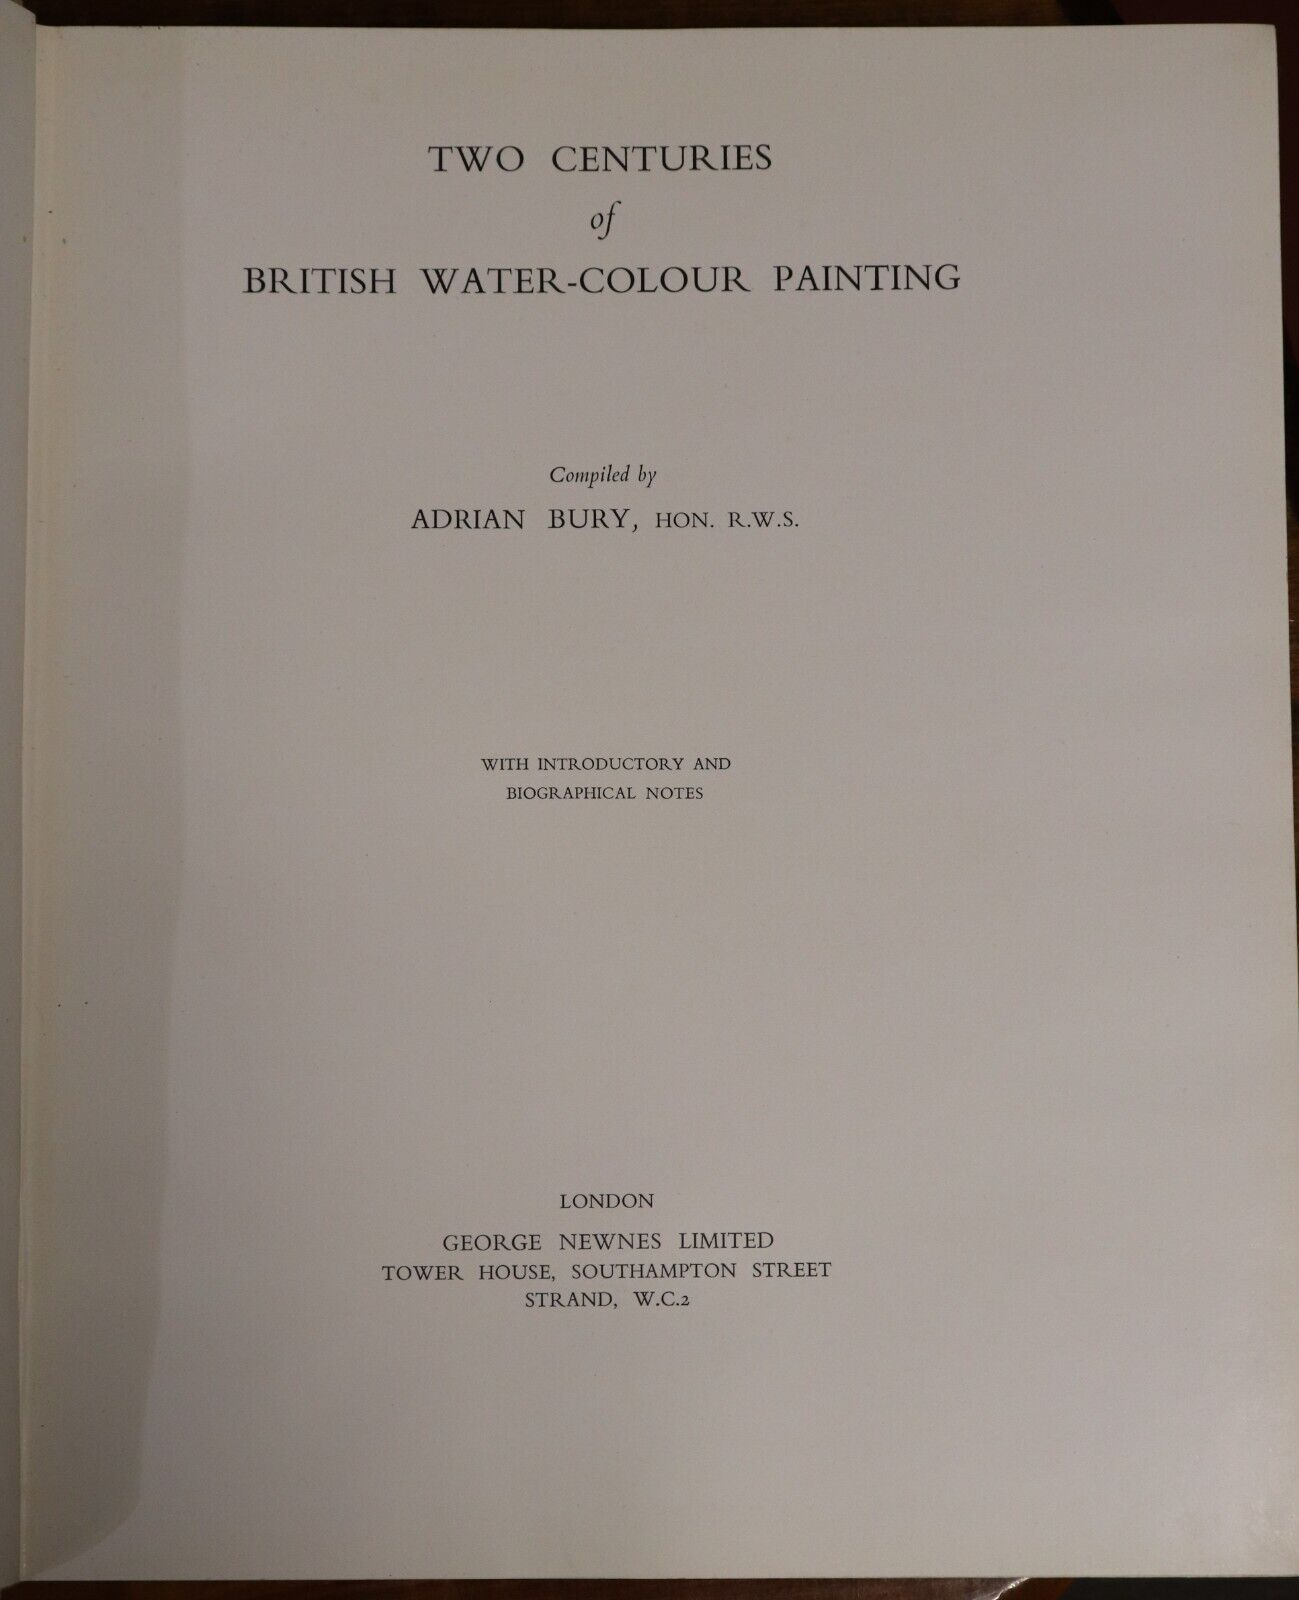 Two Centuries Of British Watercolour Painting - 1950 - 1st Edition Art Book - 0